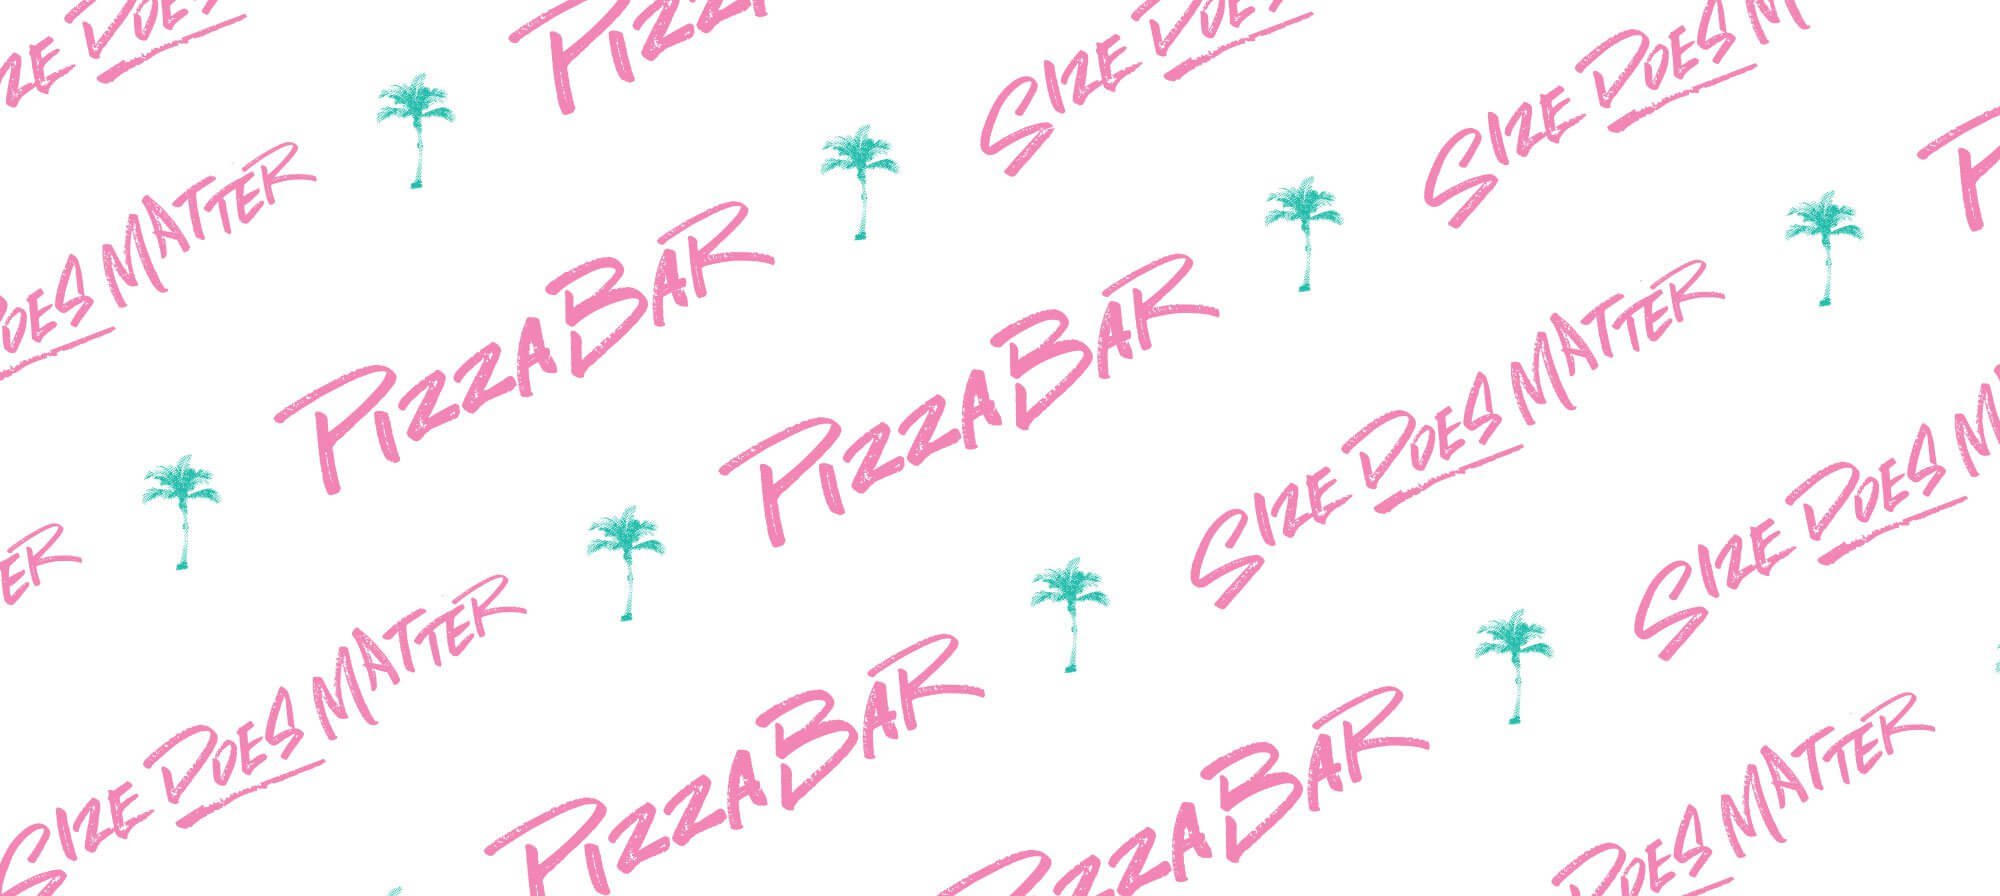 Pizza Bar branded pattern design by Jacober Creative